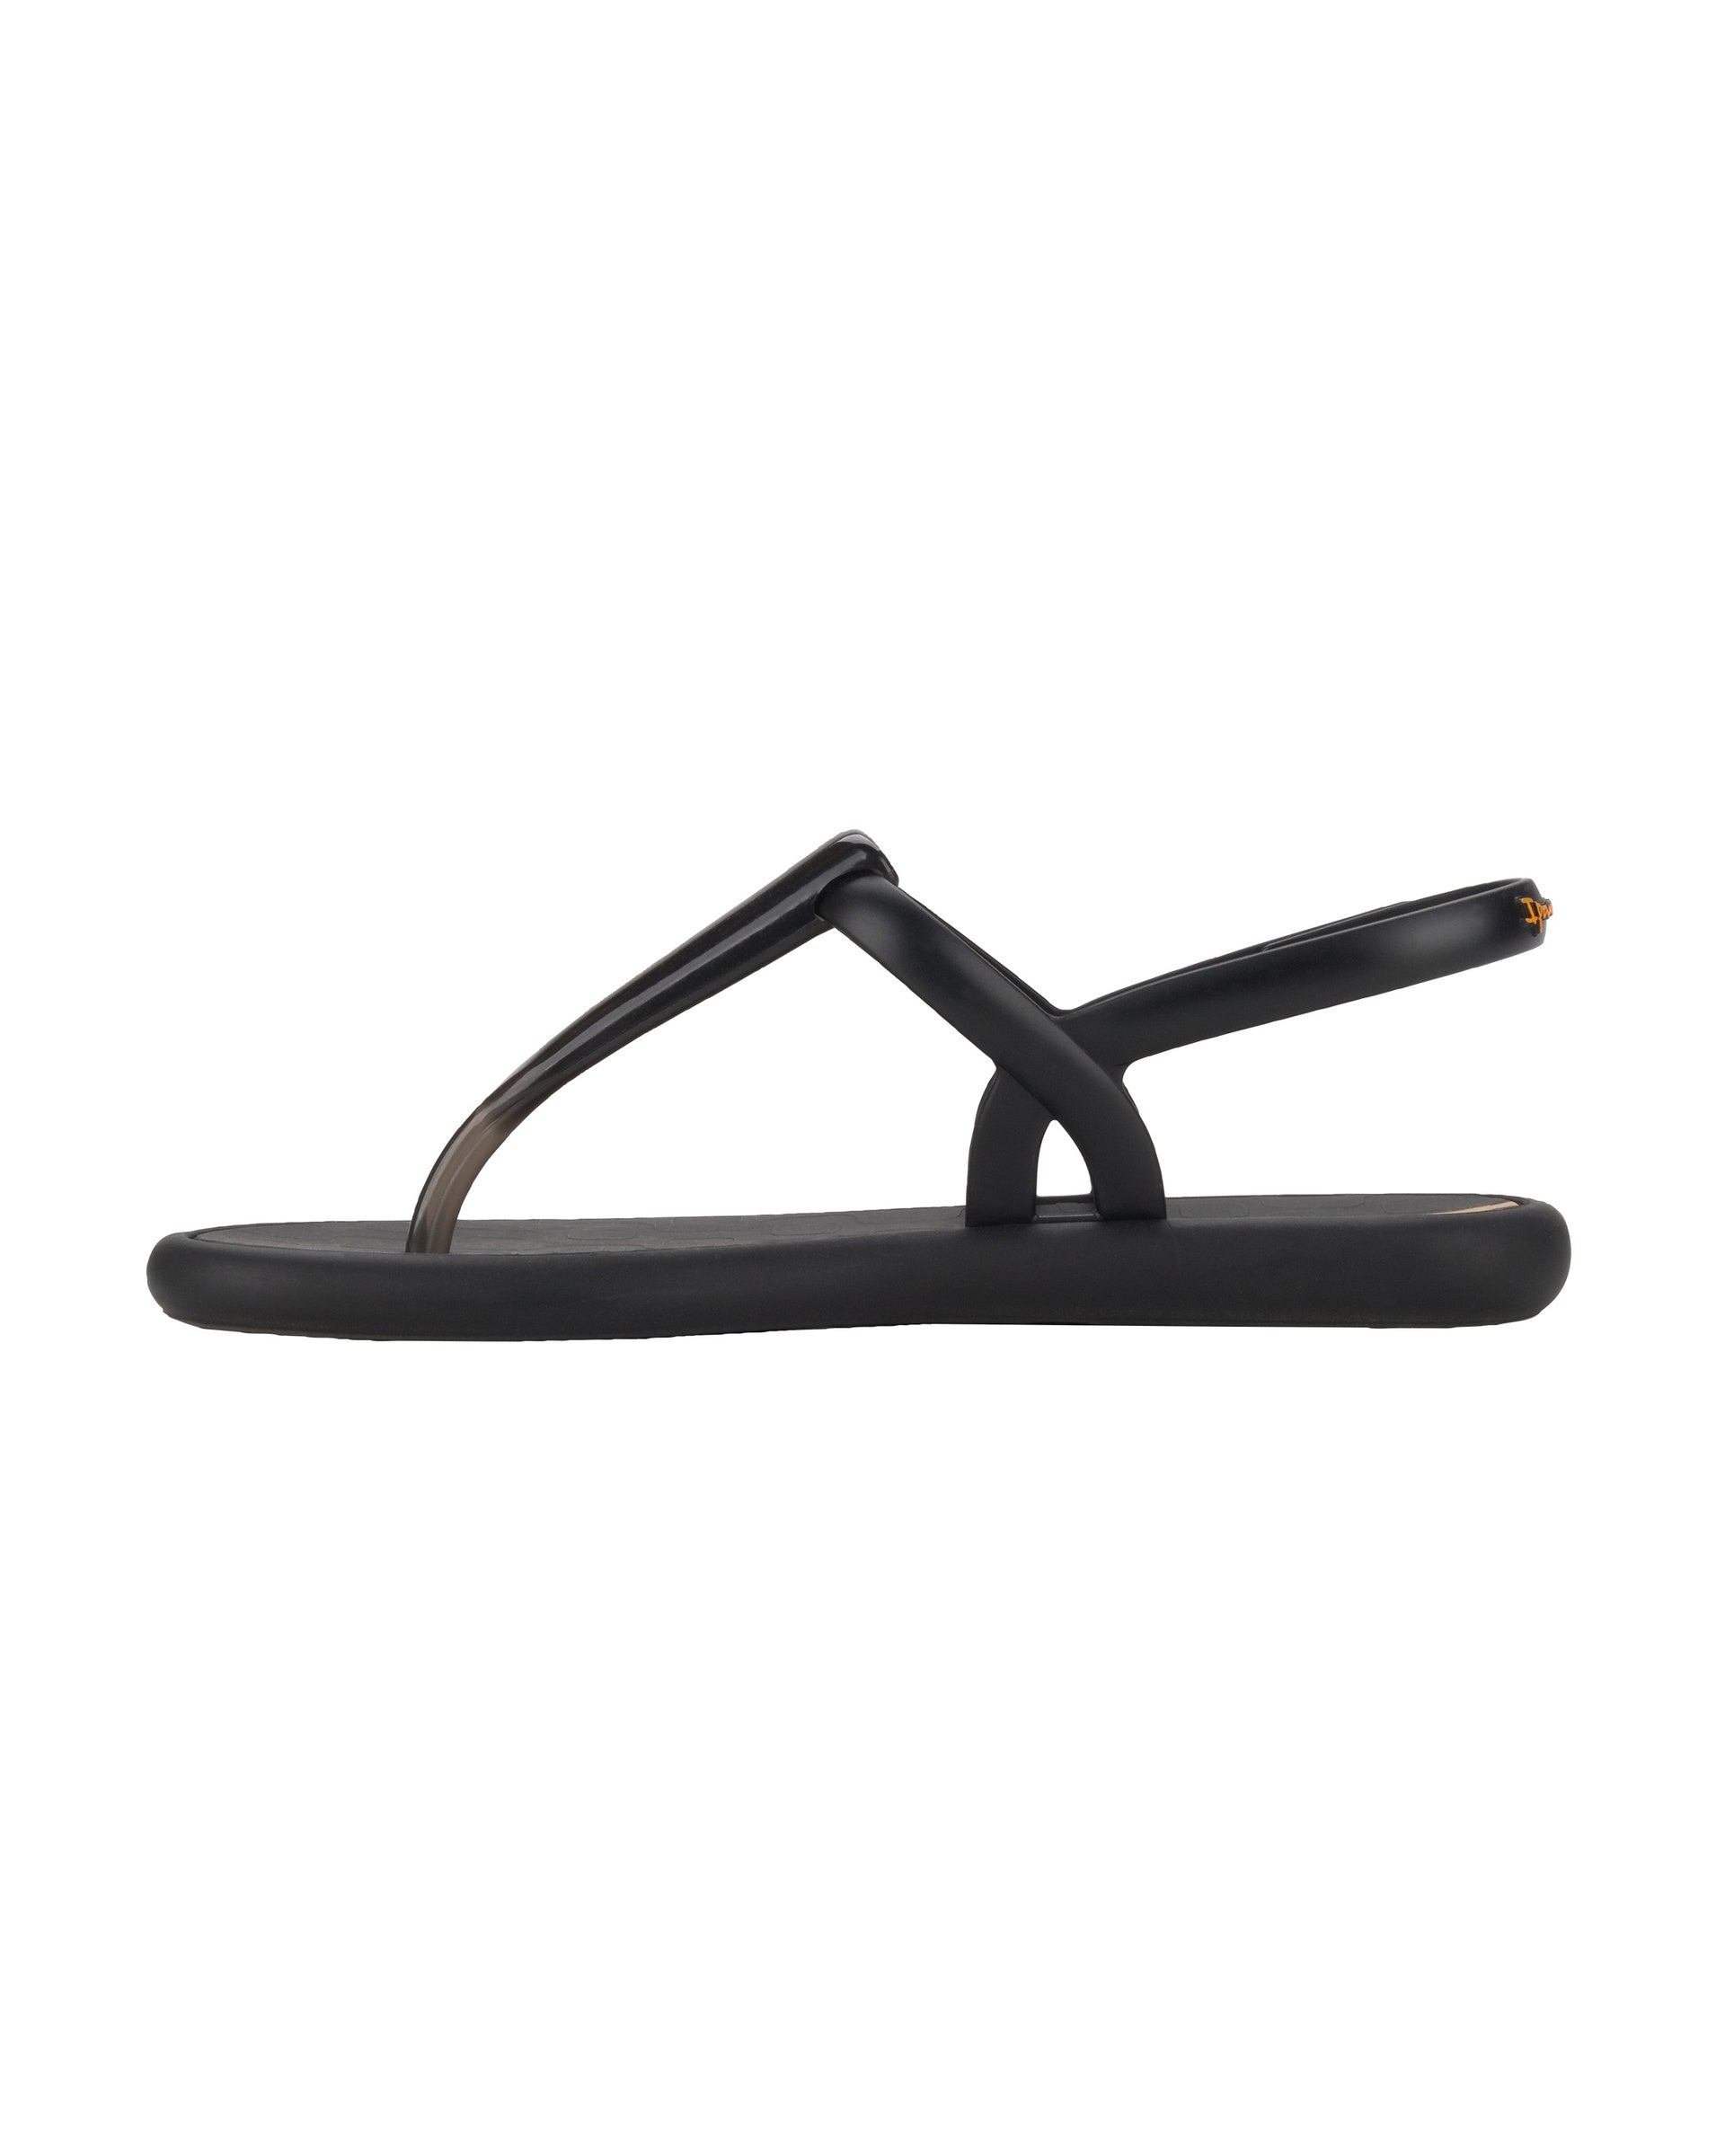 Inner side view of a black Ipanema Glossy women's t-strap sandal.